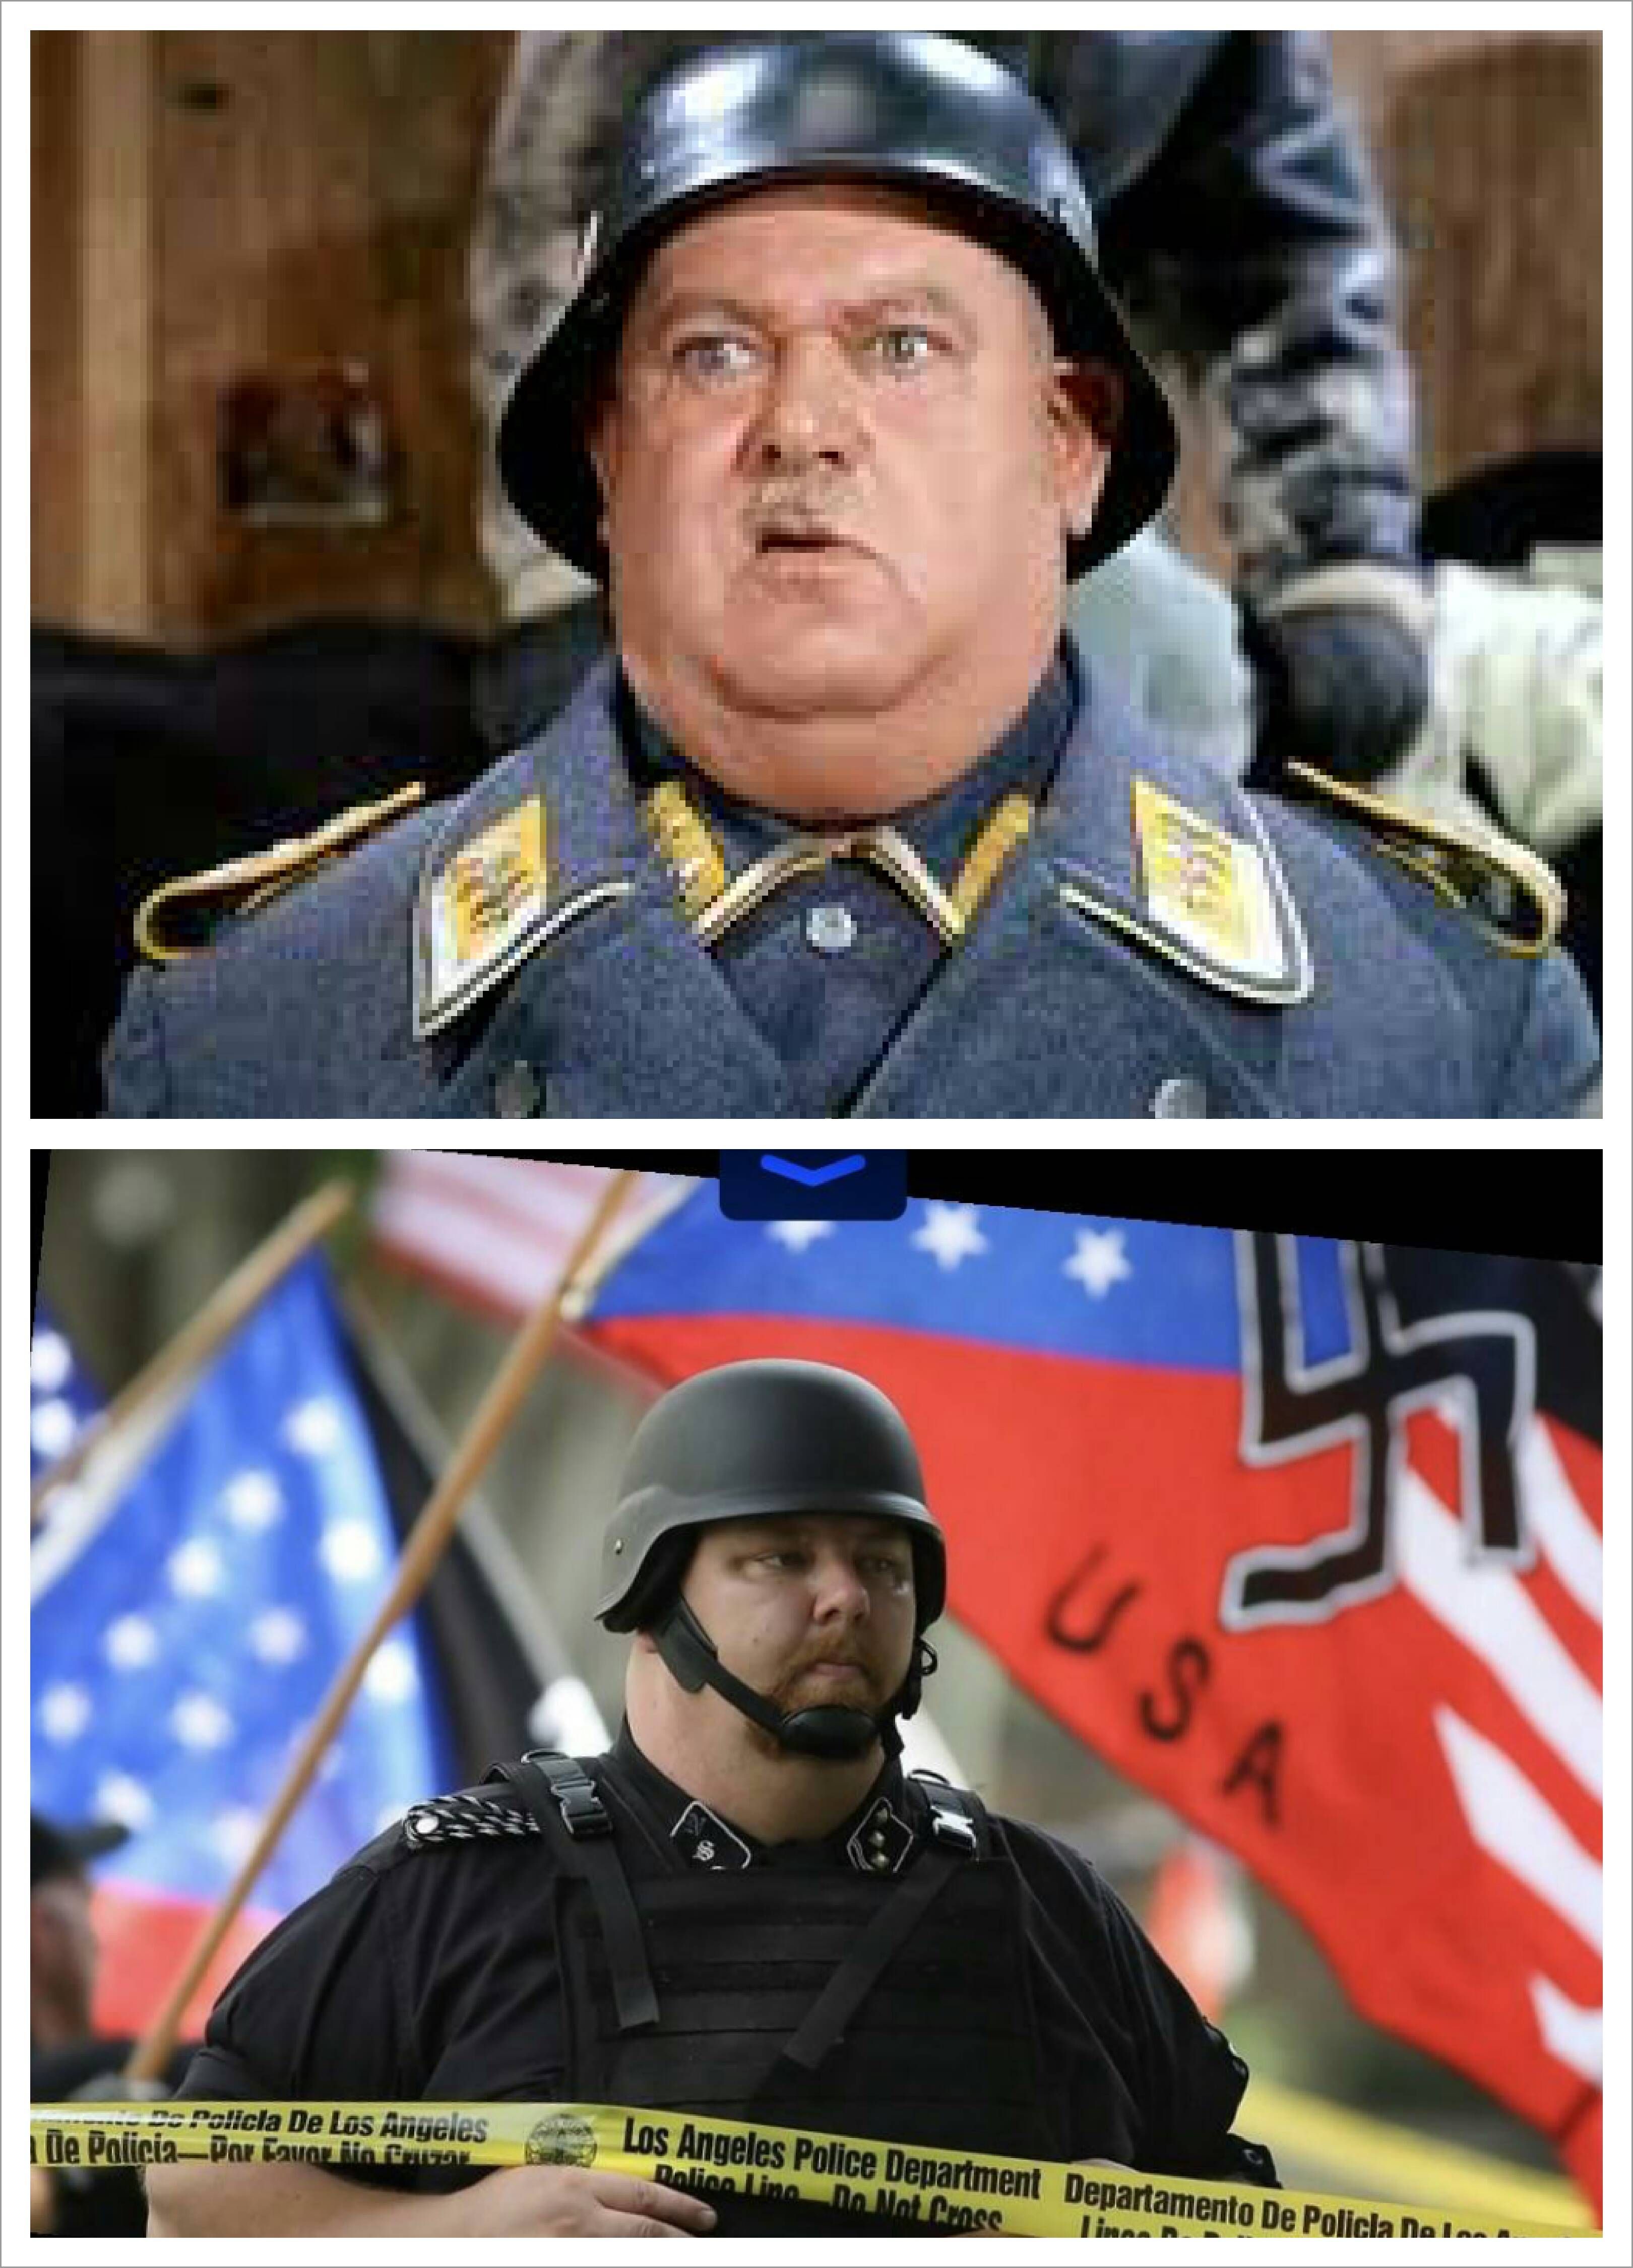 Sgt Schultz's legacy lives on